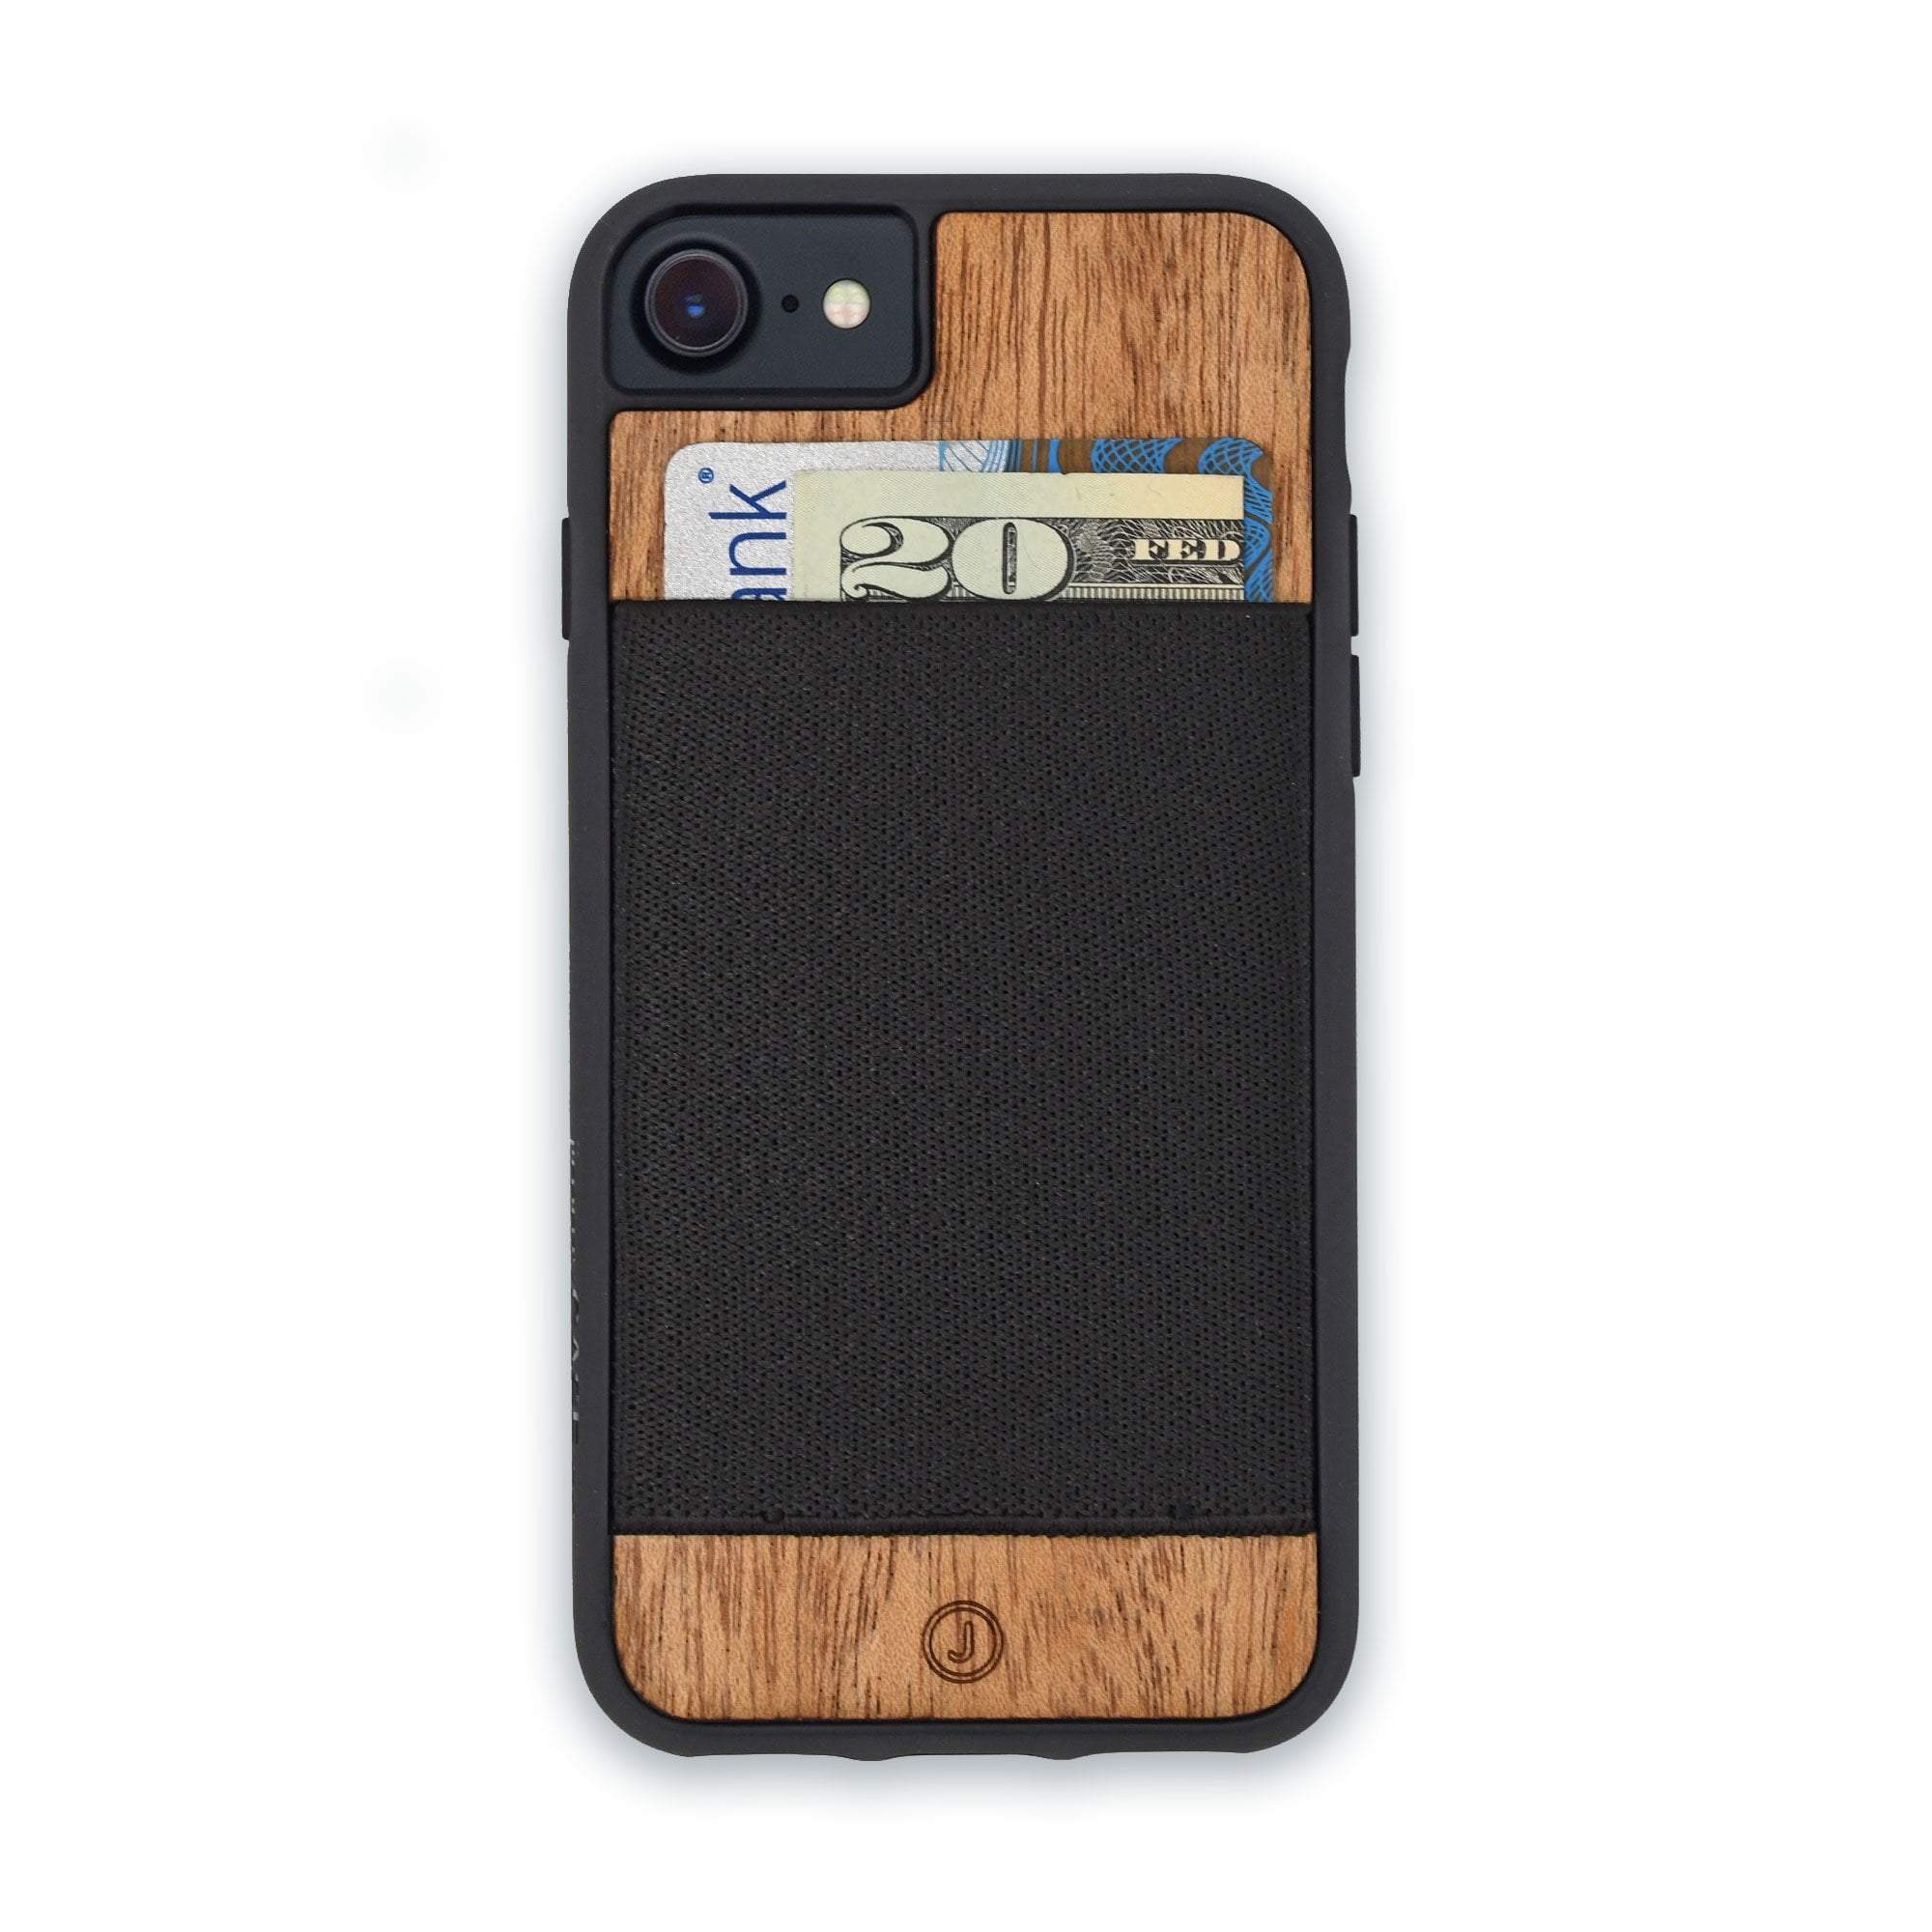 Top iPhone 6 Cardholder Cases for Convenience插图4